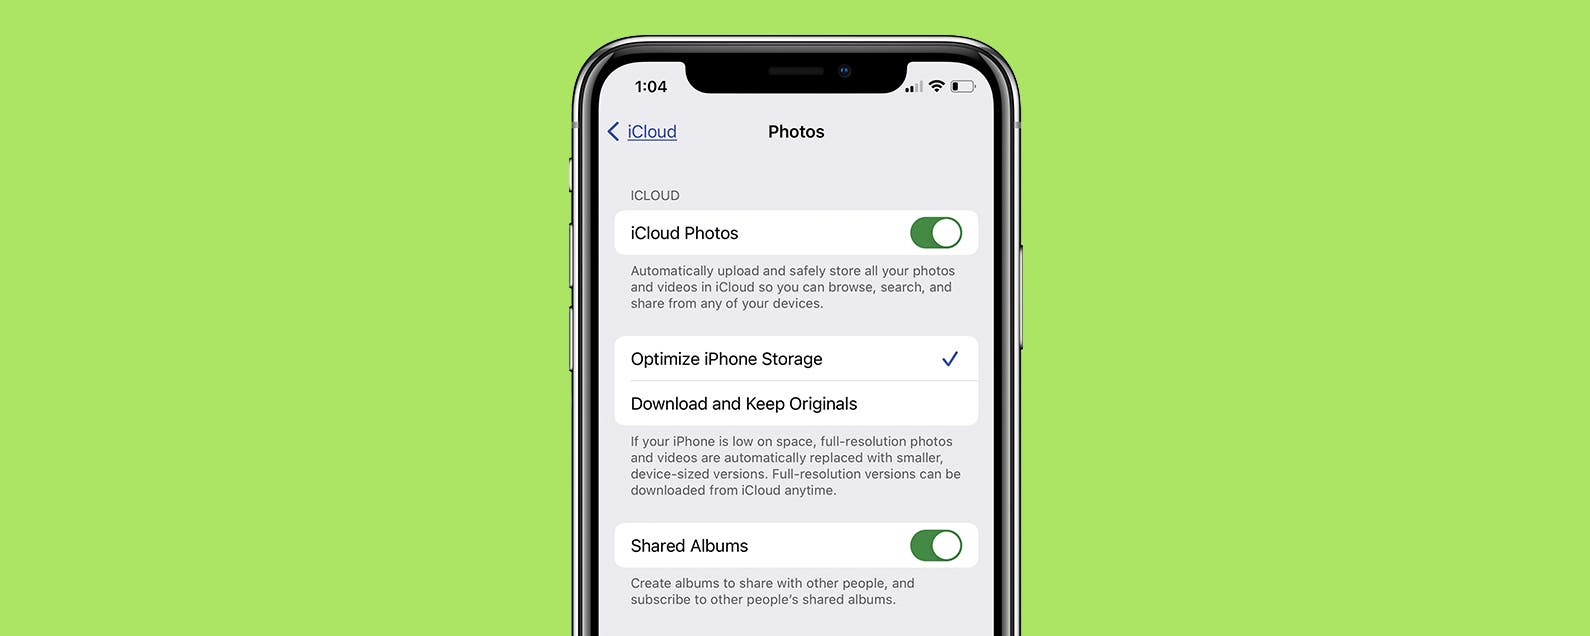 how to get pictures from icloud to computer